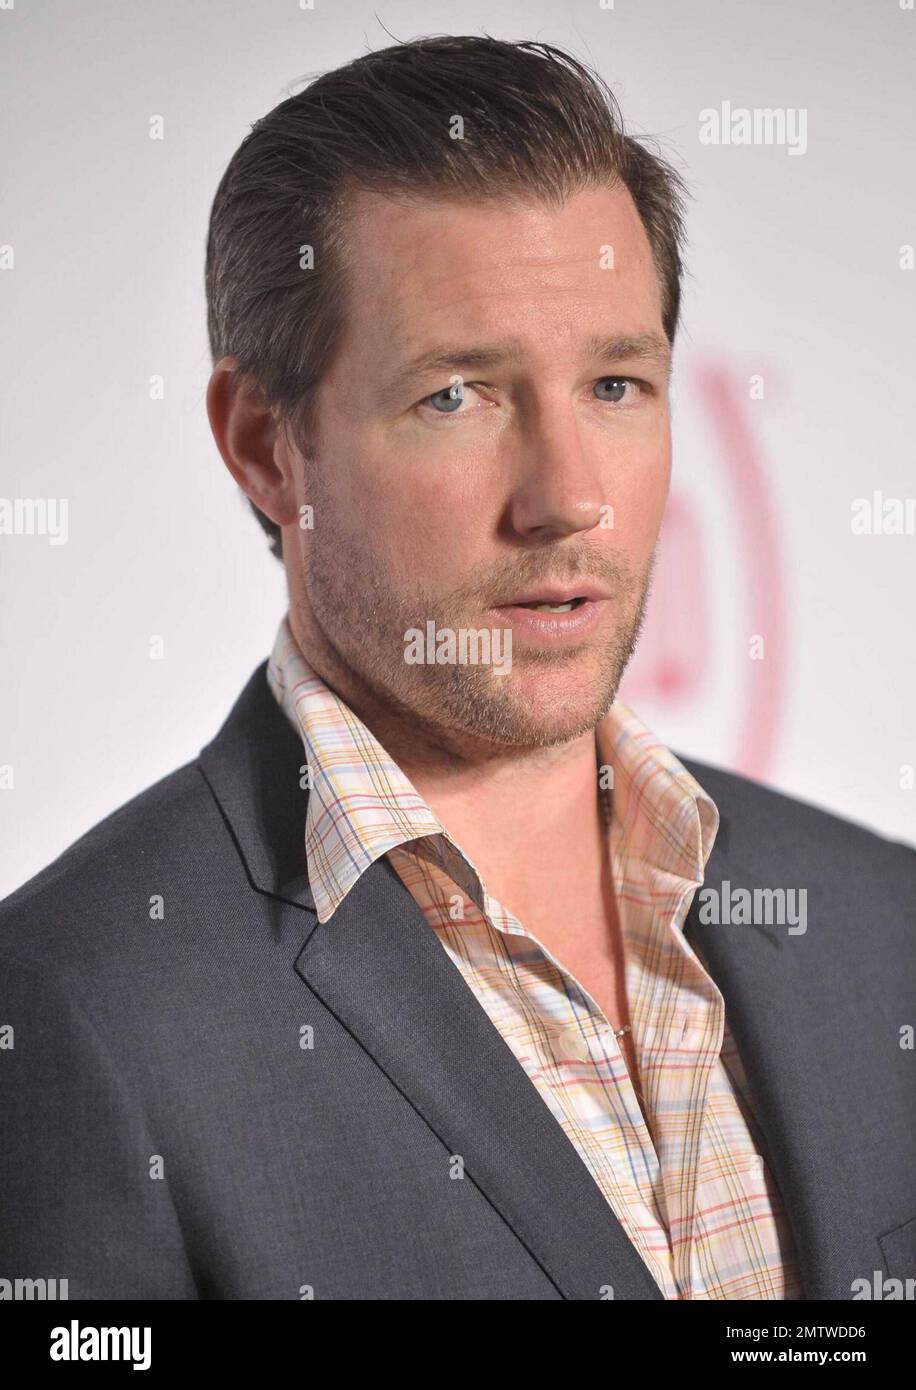 Edward Burns arrives at The Ace Hotel for the premiere of 'The Lazarus Effect', a public awareness film presented by HBO and directed by photographer Brigitte Lacombe.  The film is part of a larger campaign spearheaded by (Red), the consumer-driven fundraising brand designed to pool funds for those affected by AIDS in Africa.  'The Lazarus Effect' features celebrities such as Hugh Jackman, Penelope Cruz, Benicio Del Toro and (Red) co-founder Bono showing off what they can buy for 40 cents. New York, NY. 05/04/10. Stock Photo